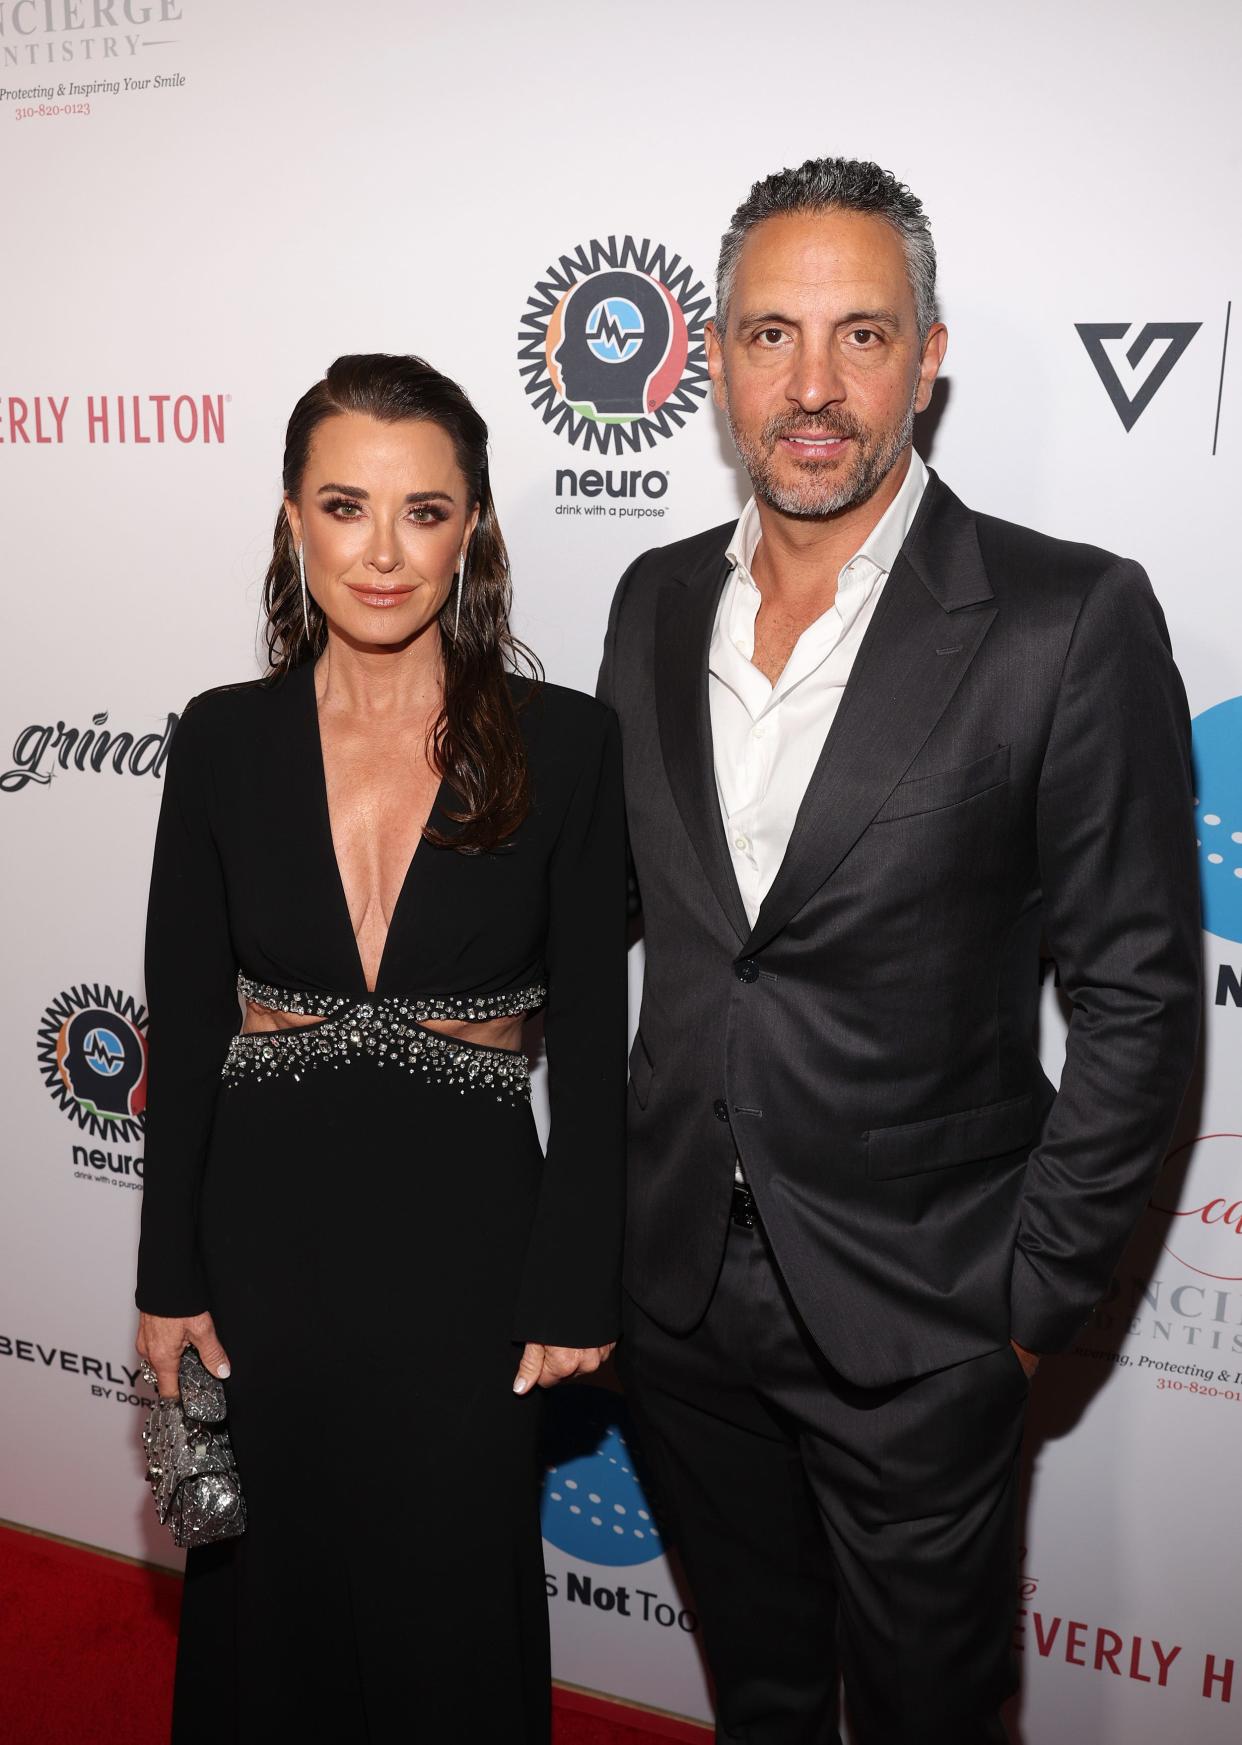 BEVERLY HILLS, CALIFORNIA - APRIL 22: Kyle Richards and Mauricio Umansky attend the Homeless Not Toothless Hollywood Gala at The Beverly Hilton on April 22, 2023 in Beverly Hills, California. (Photo by Jesse Grant/Getty Images for Homeless Not Toothless) ORG XMIT: 775965952 ORIG FILE ID: 1484446800